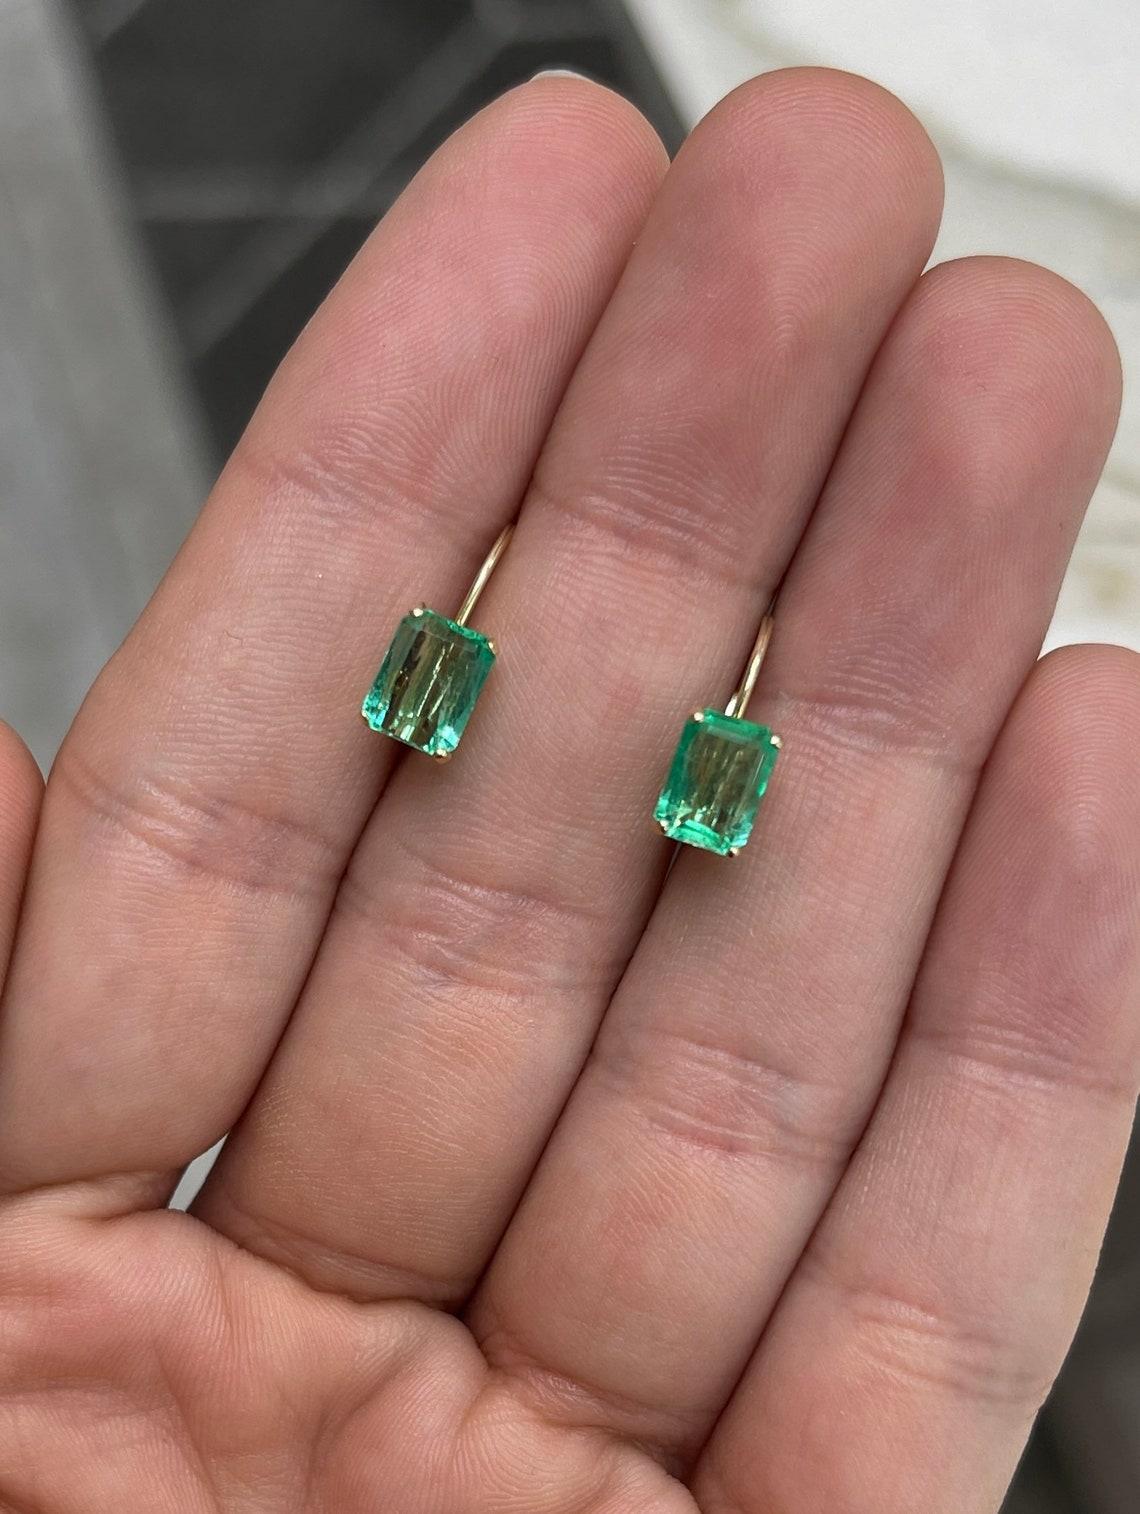 A simple pair of emerald cut-emerald lever back earrings made in 14K yellow gold. The chic pair of lever back earrings feature green, natural Emeralds. The emeralds have beautiful eye clarity, displaying minor flaws that are normal in all